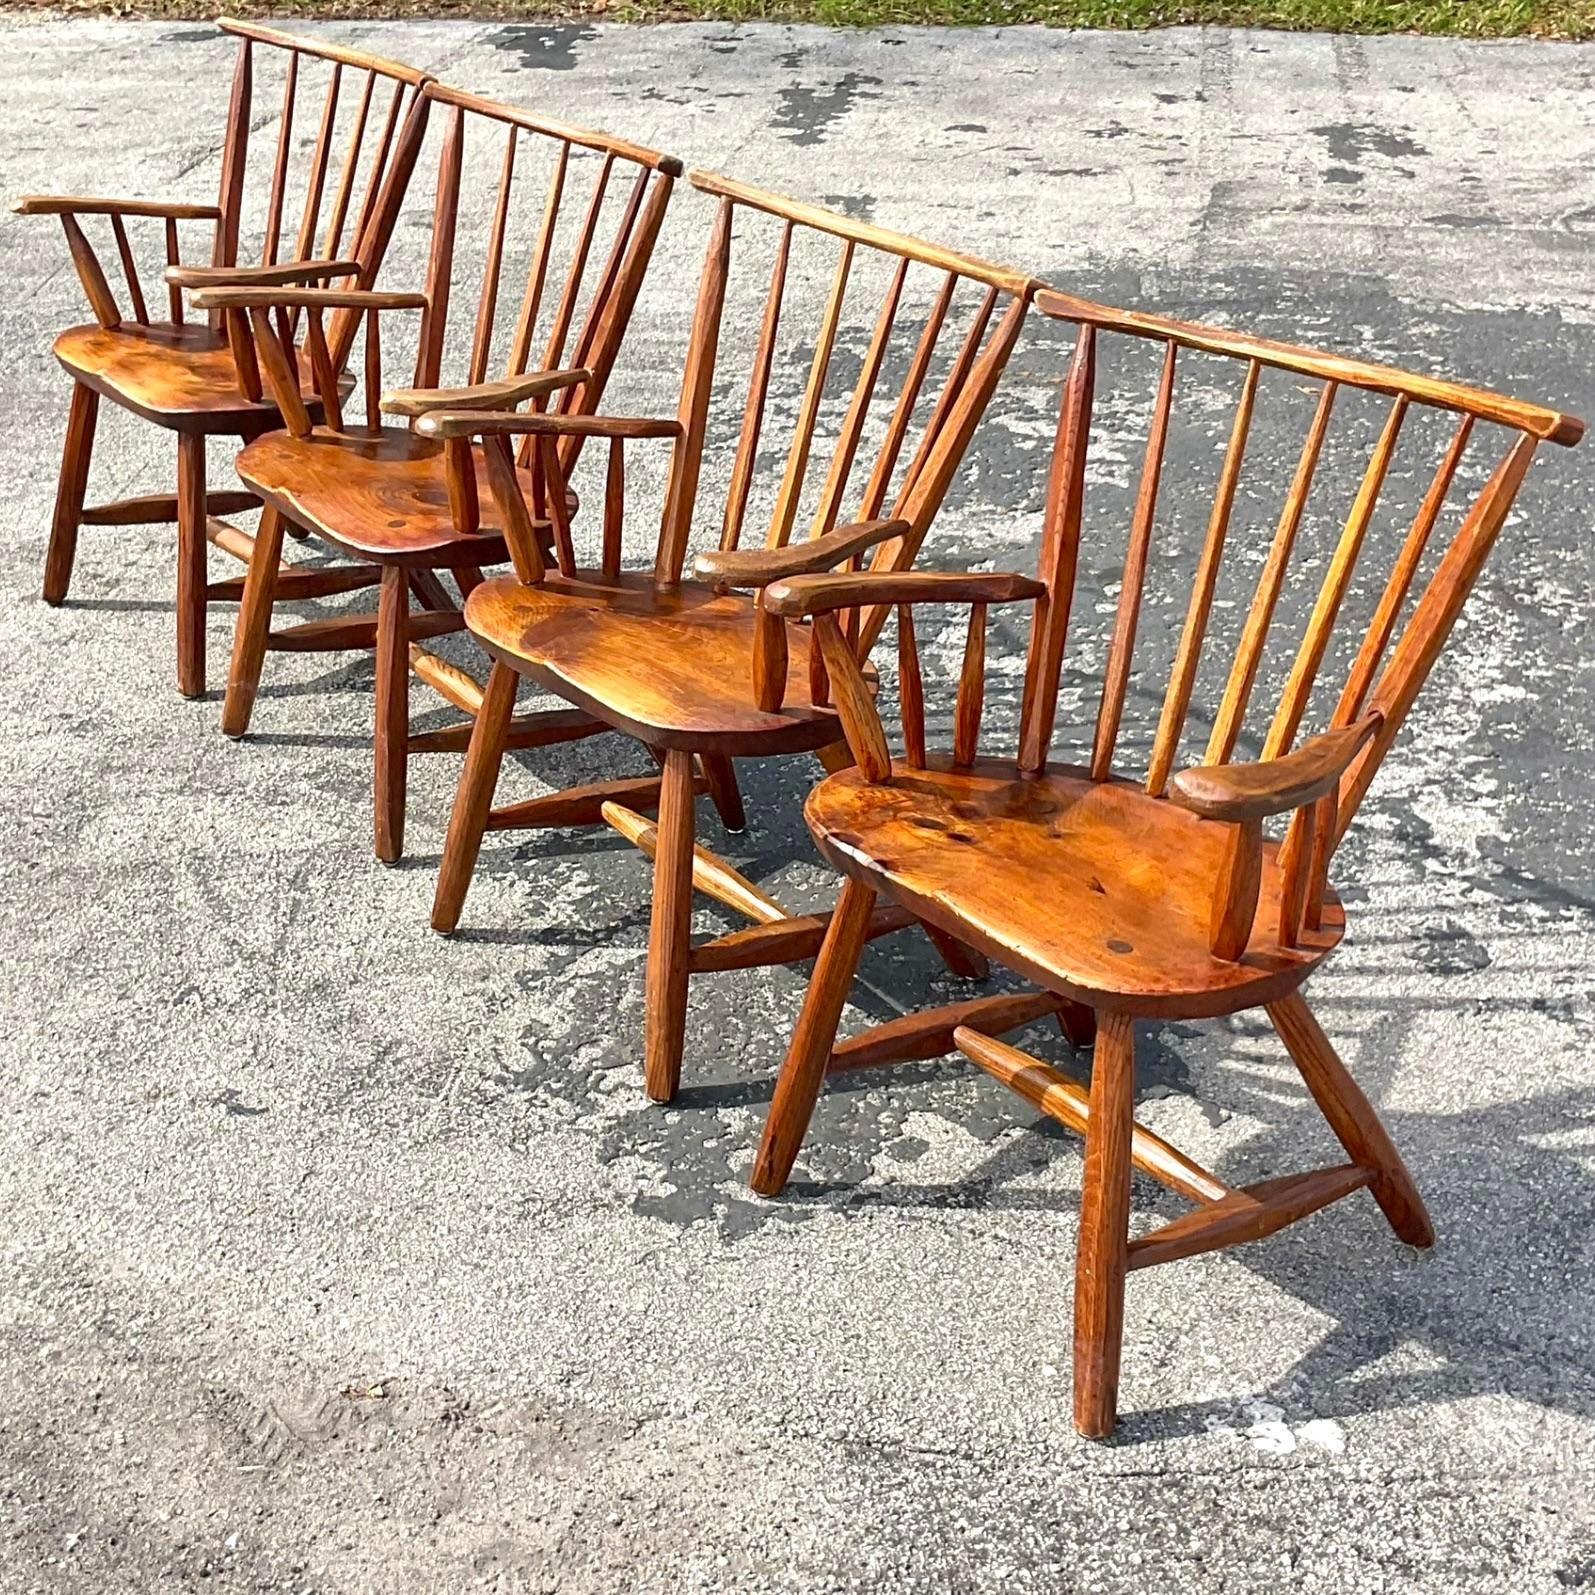 American Vintage Boho Rustic Spindle Back Chairs - Set of 4 For Sale